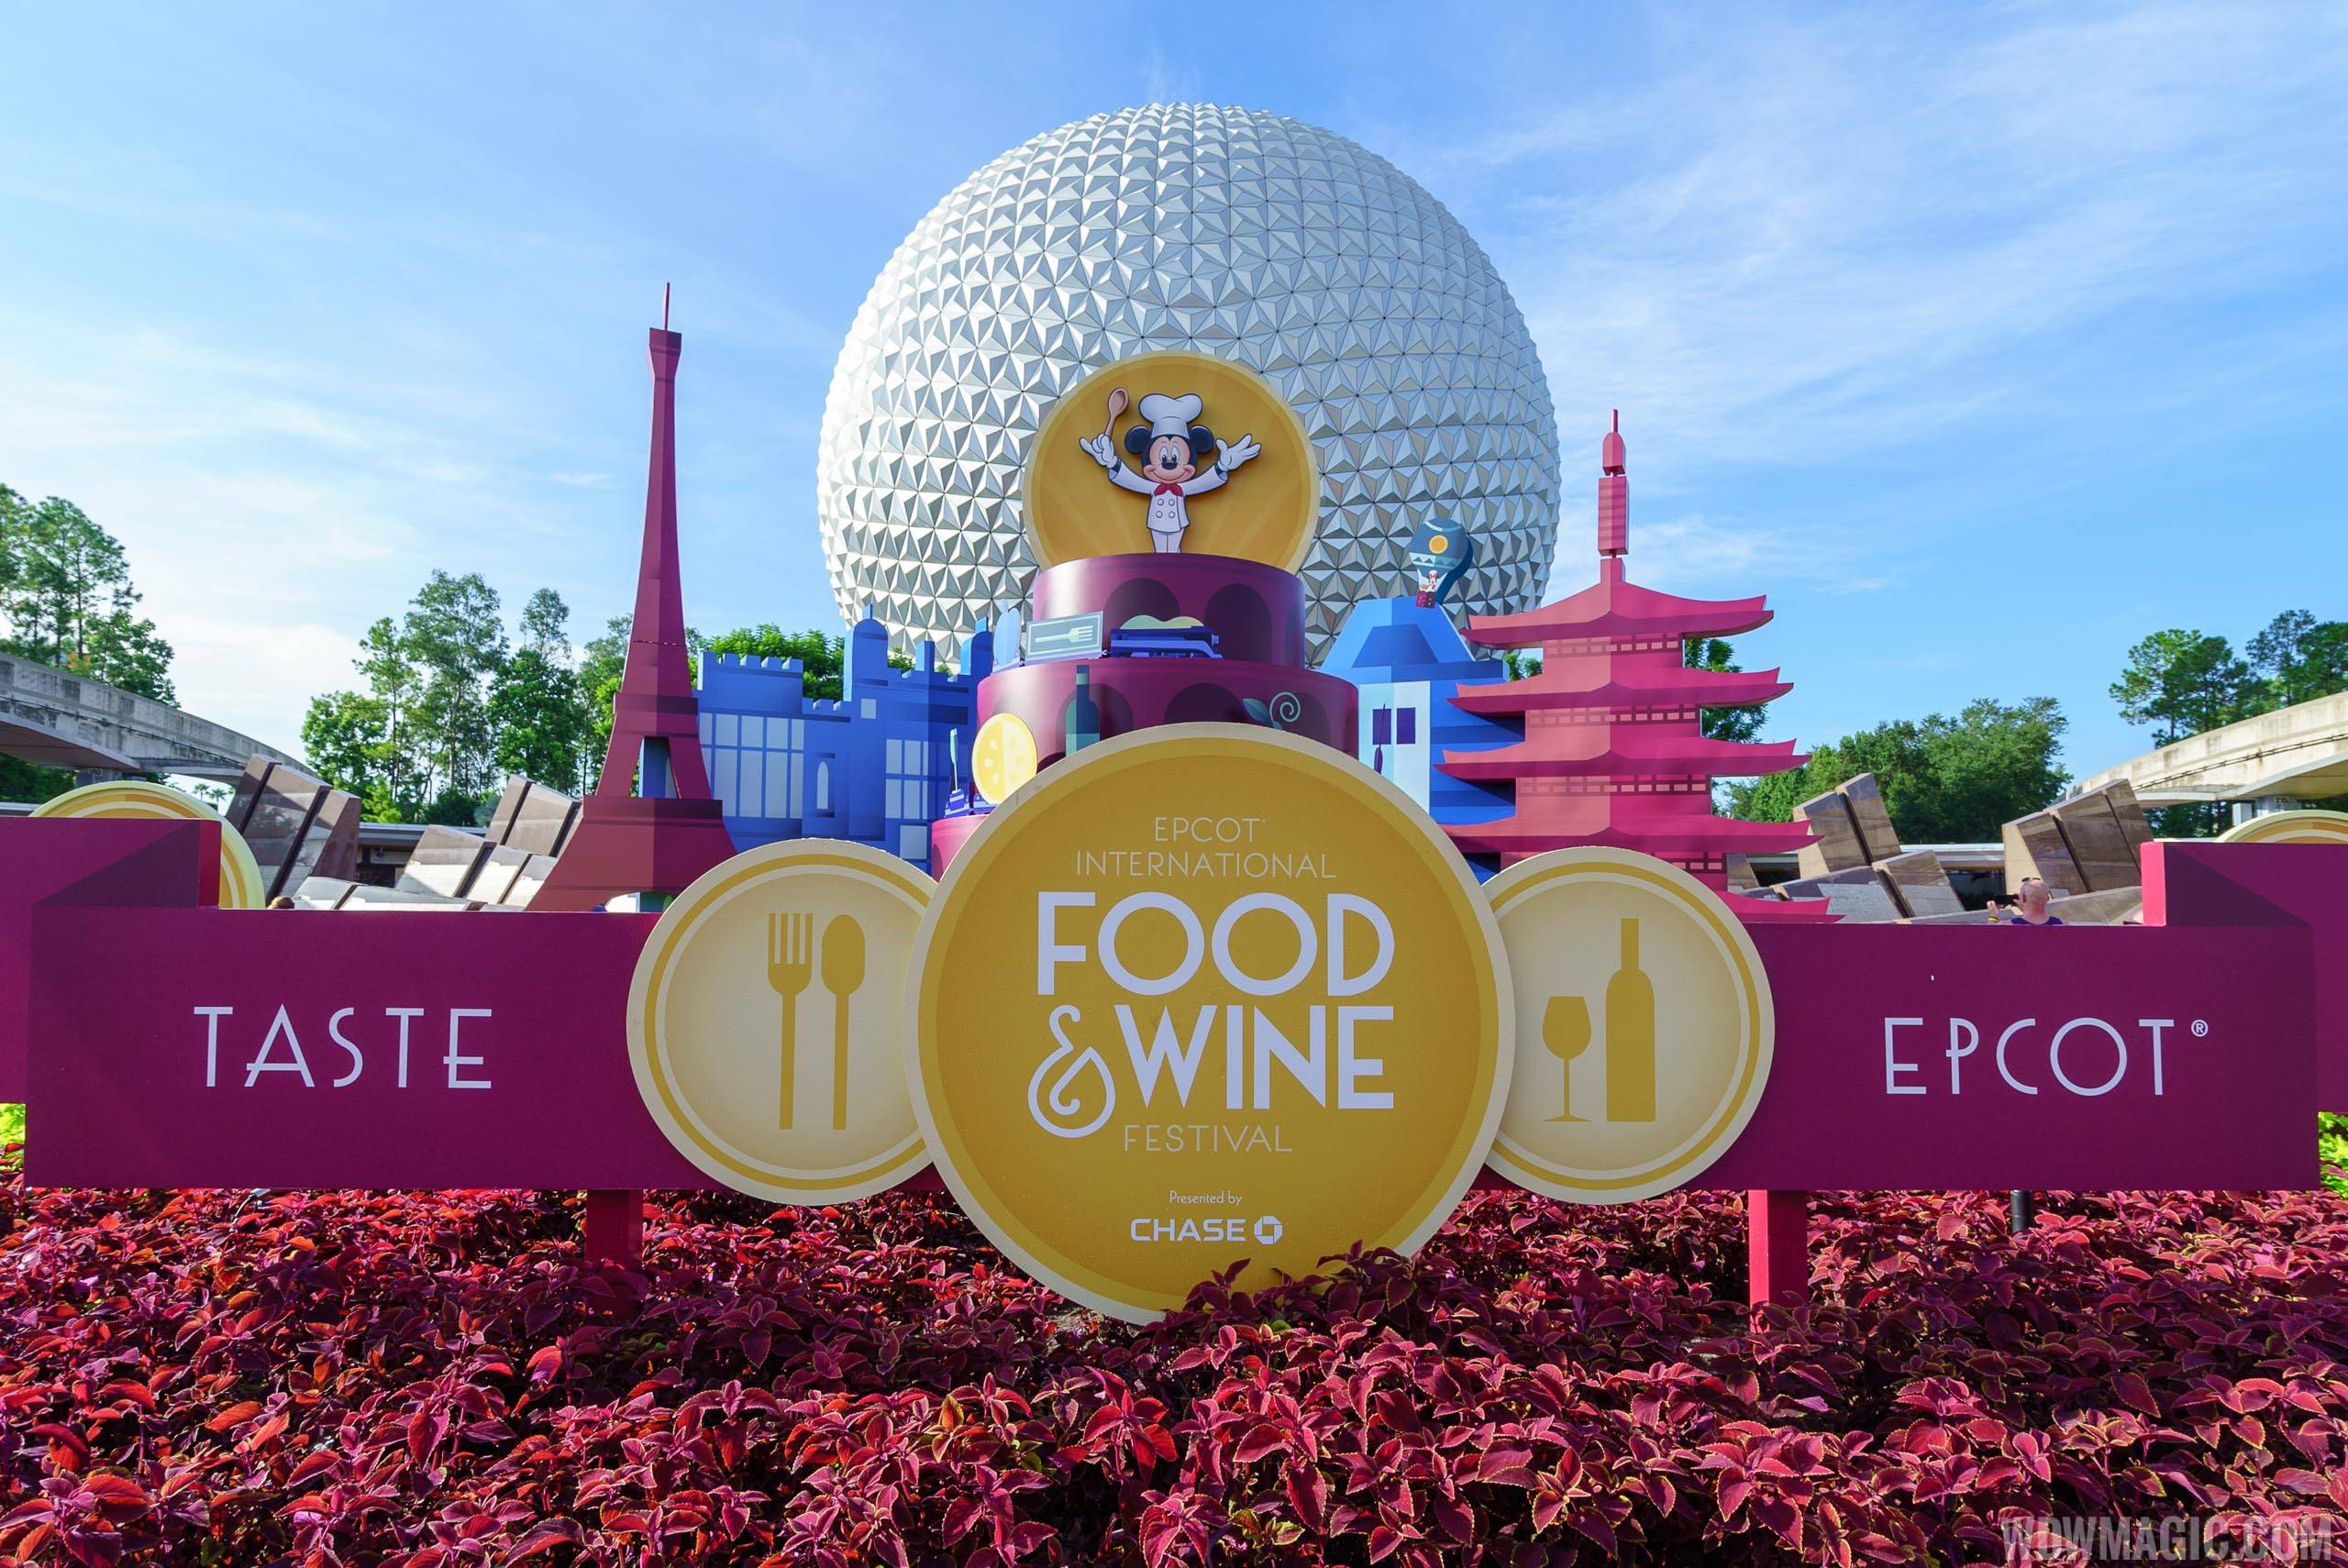 2016 Epcot Food and Wine Festival - Main entrance